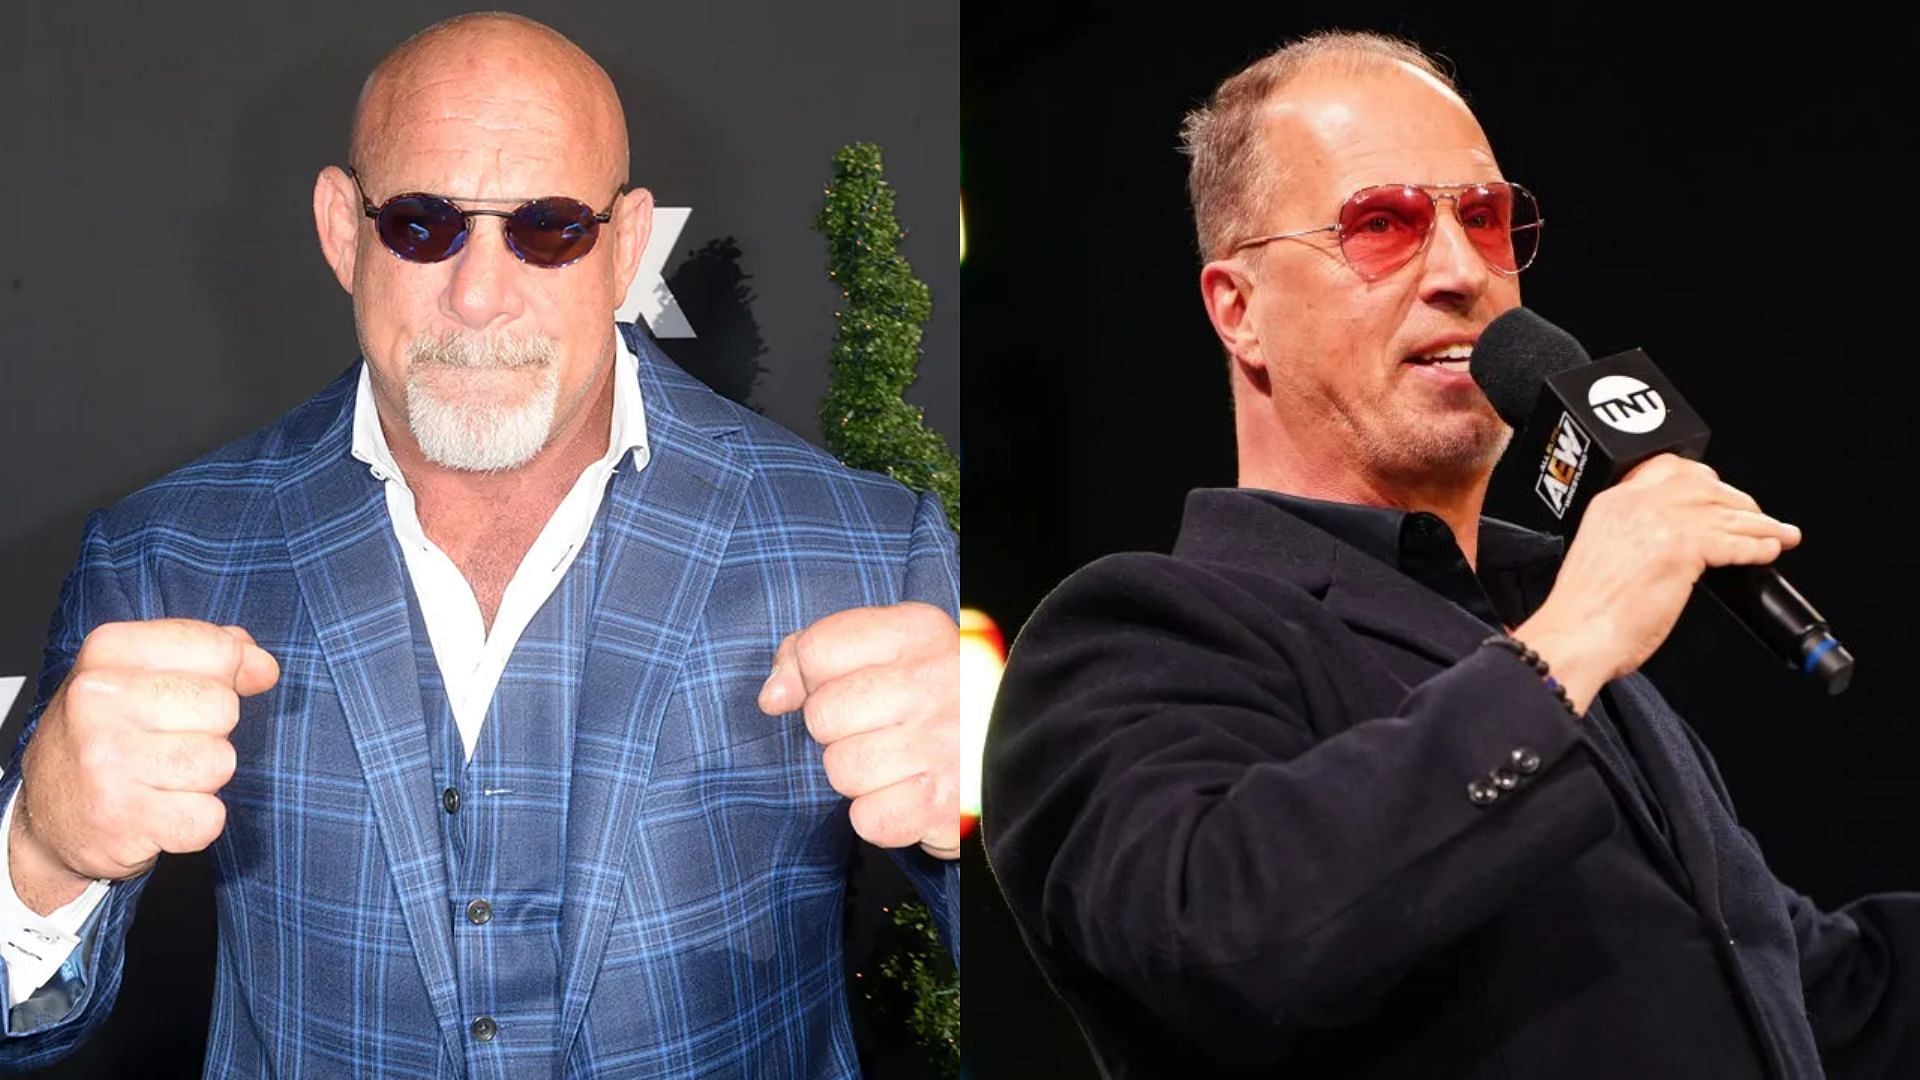 Will Goldberg be the one elevate Don Callis